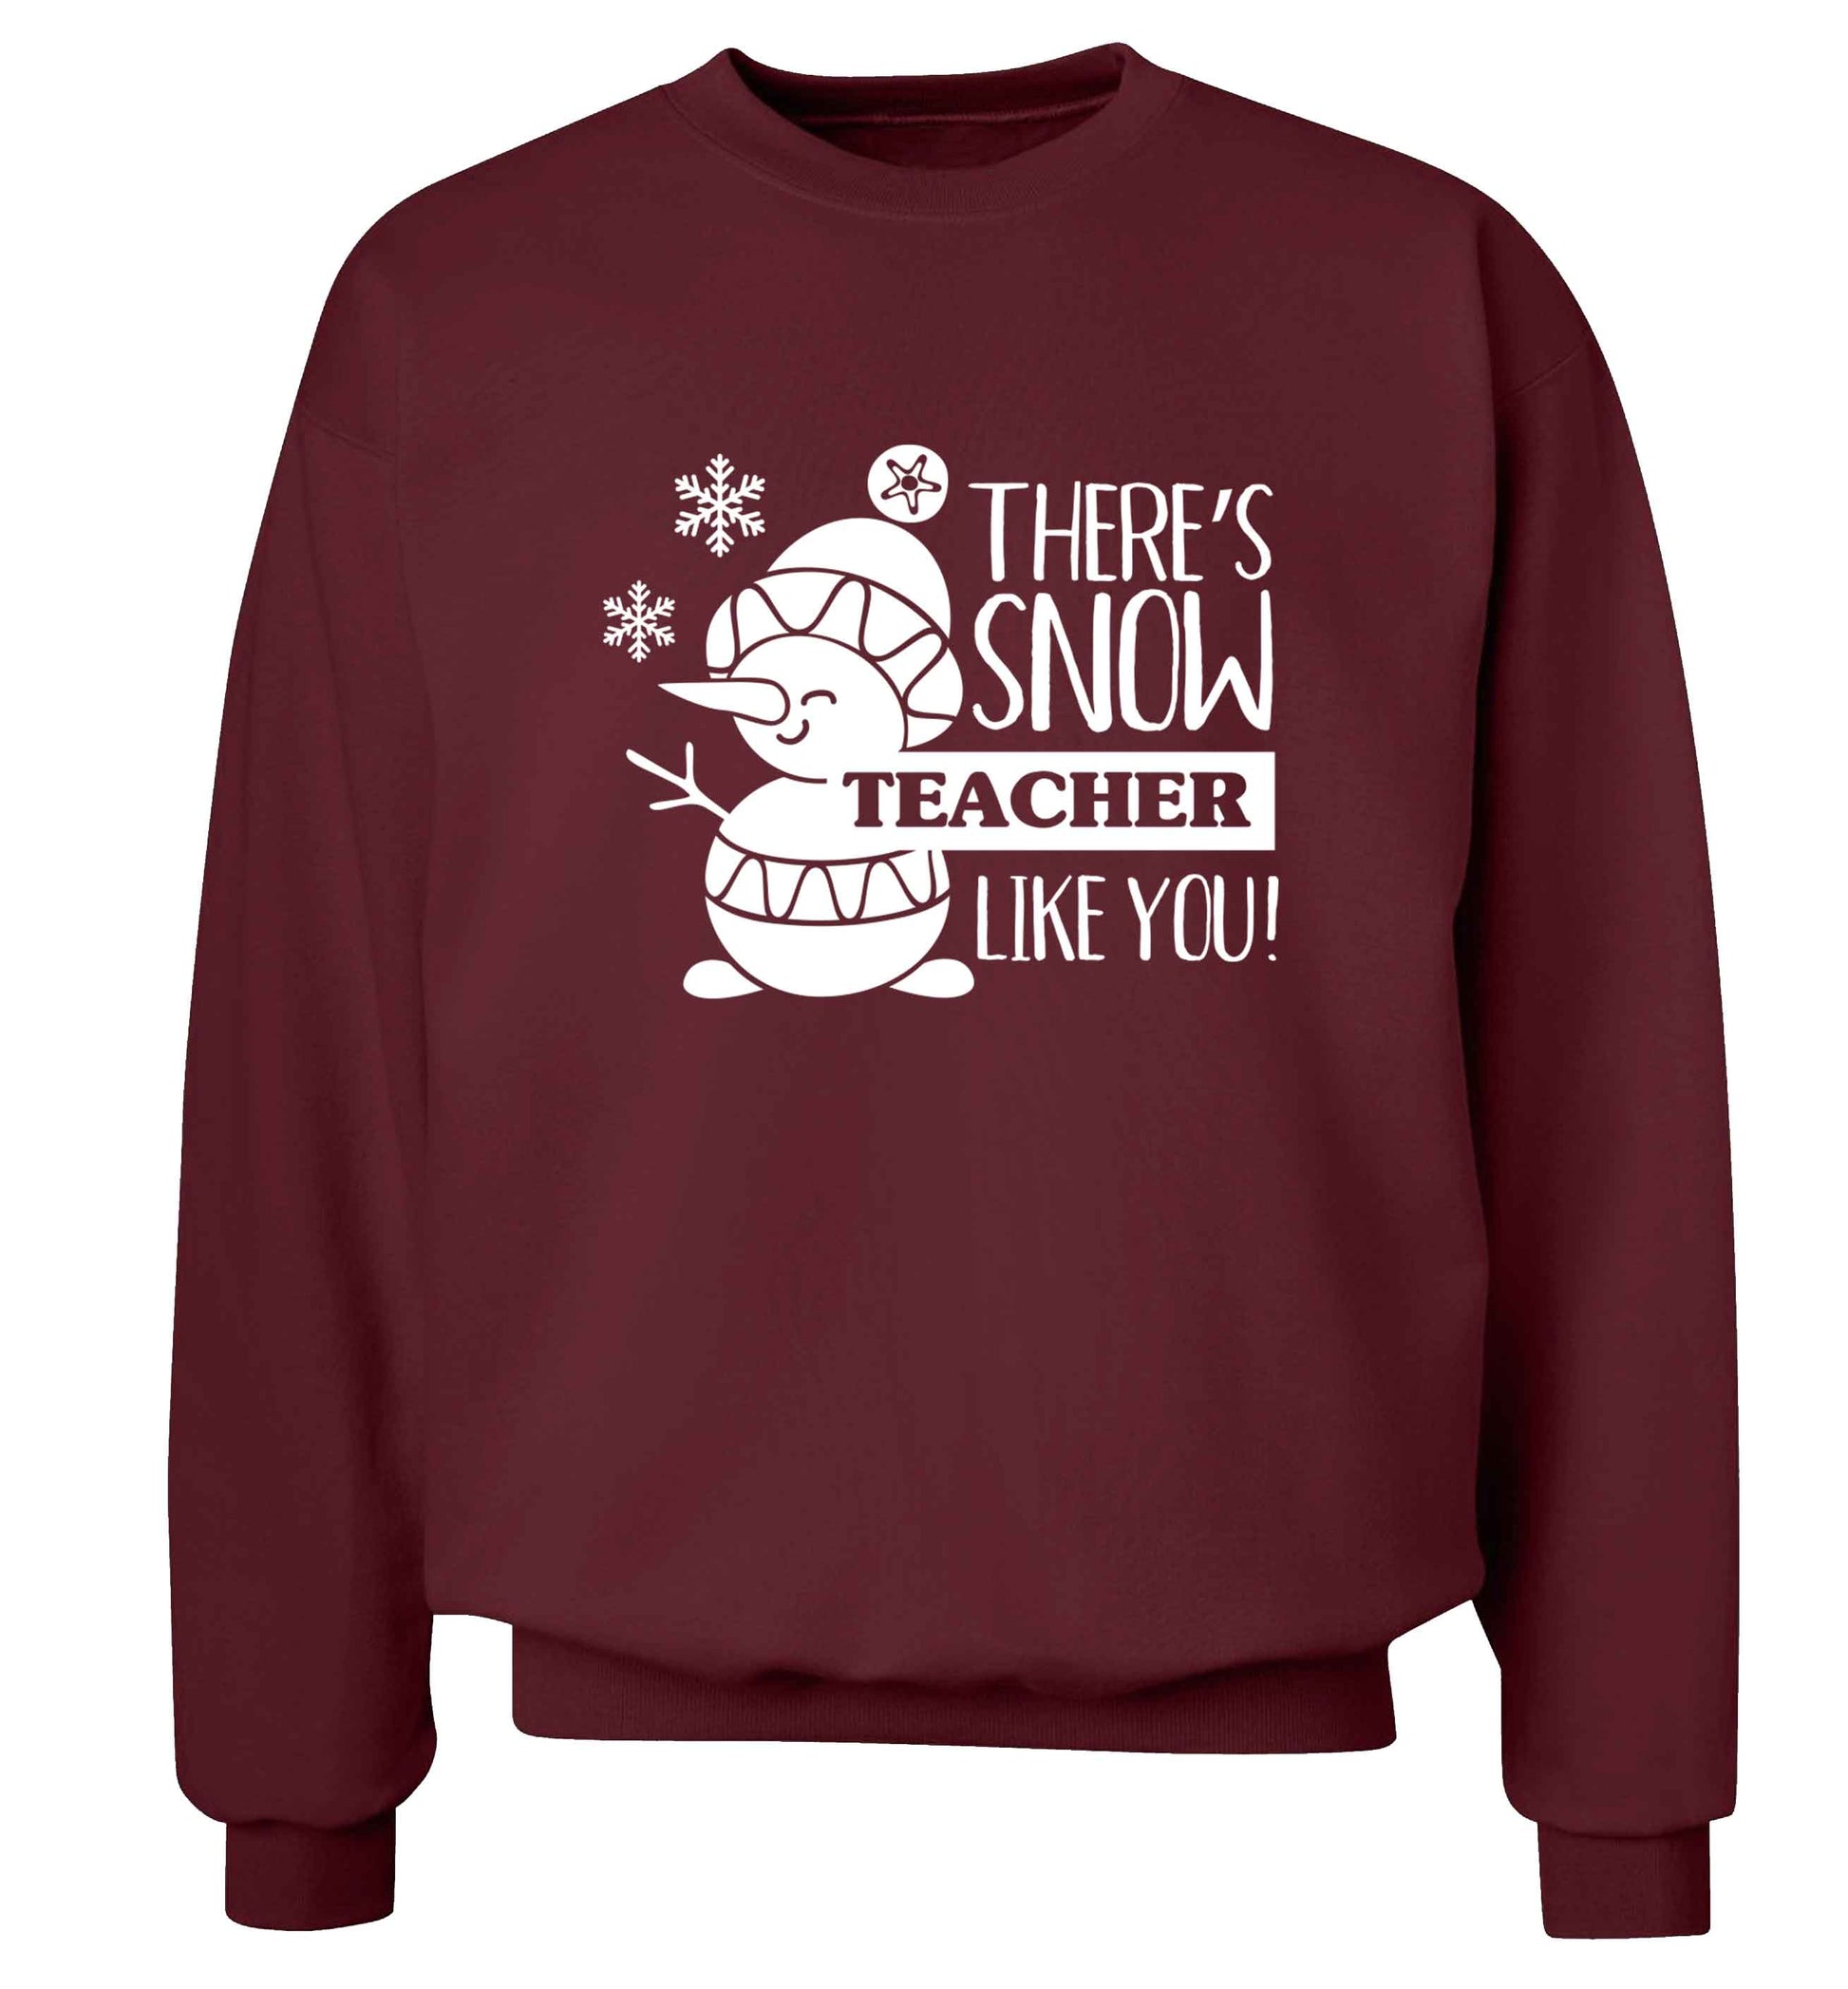 There's snow teacher like you adult's unisex maroon sweater 2XL